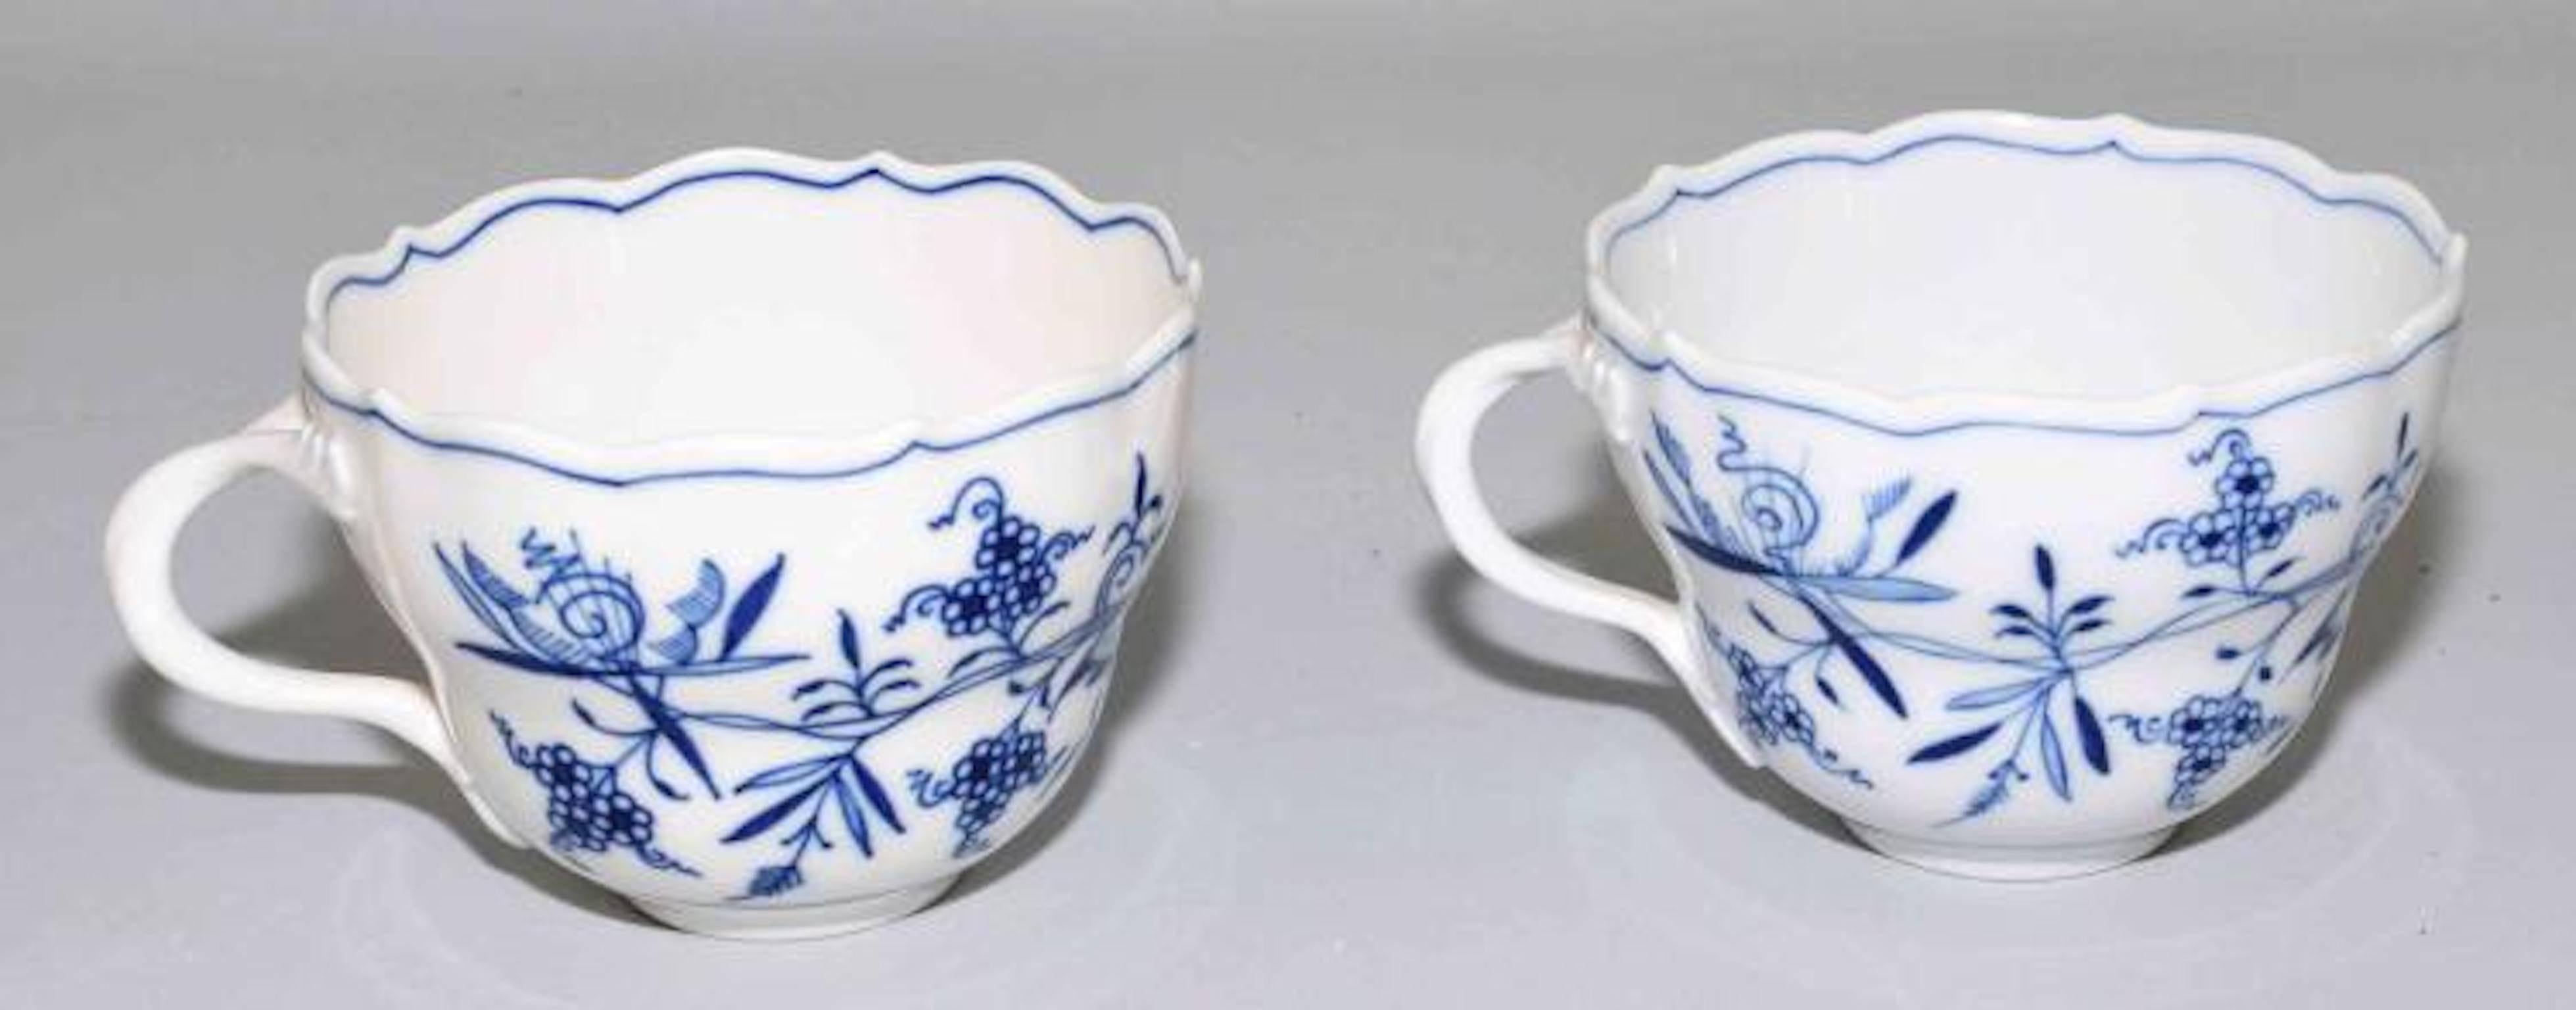 Meissen Porcelain Blue Onion Cups and Saucers, Set of Two In Good Condition For Sale In Washington Crossing, PA